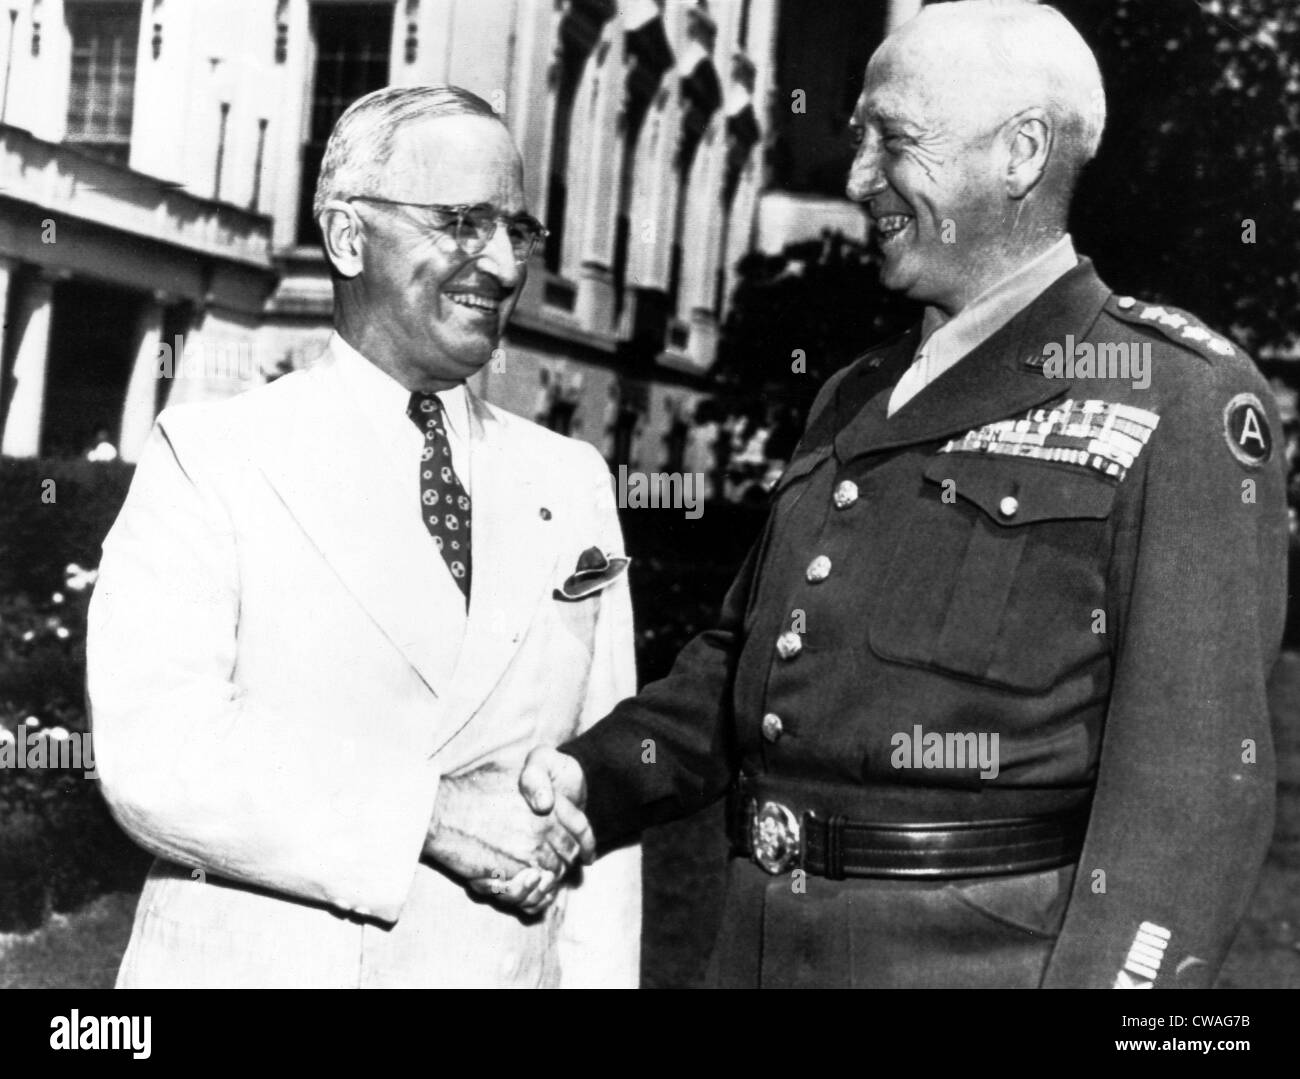 Lt. General George S. Patton shaking hands with President Truman, 1940s. Courtesy: CSU Archives / Everett Collection Stock Photo